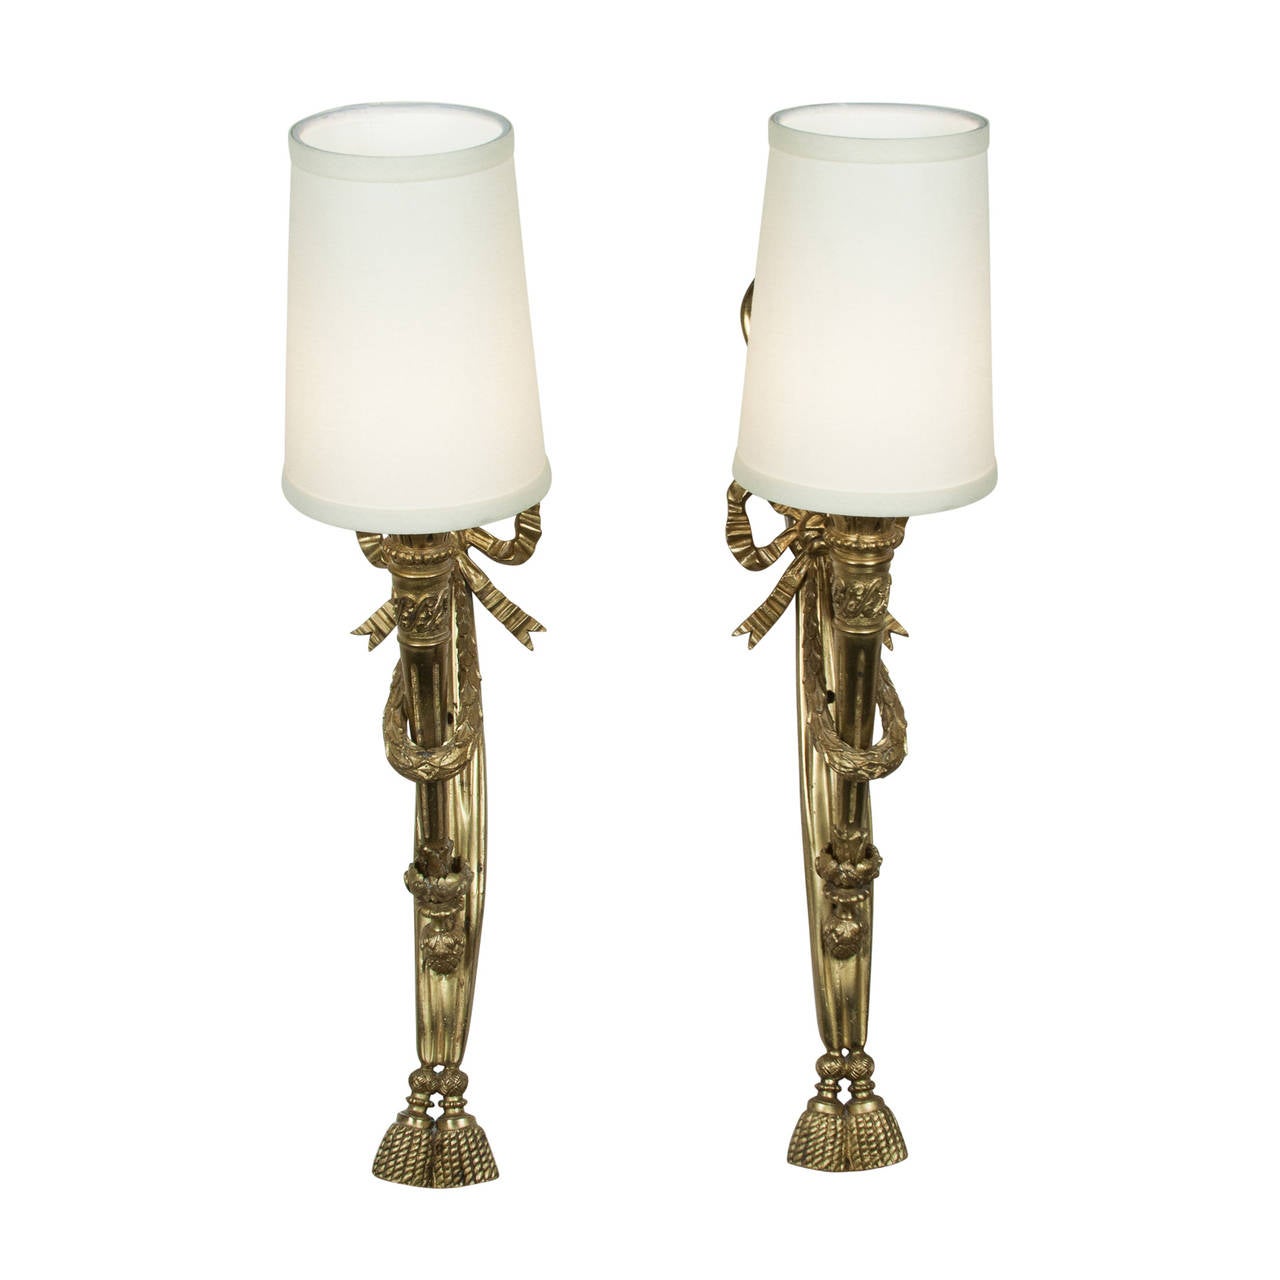 Pair of Tall Torch Wall Sconces In Excellent Condition For Sale In Brooklyn, NY